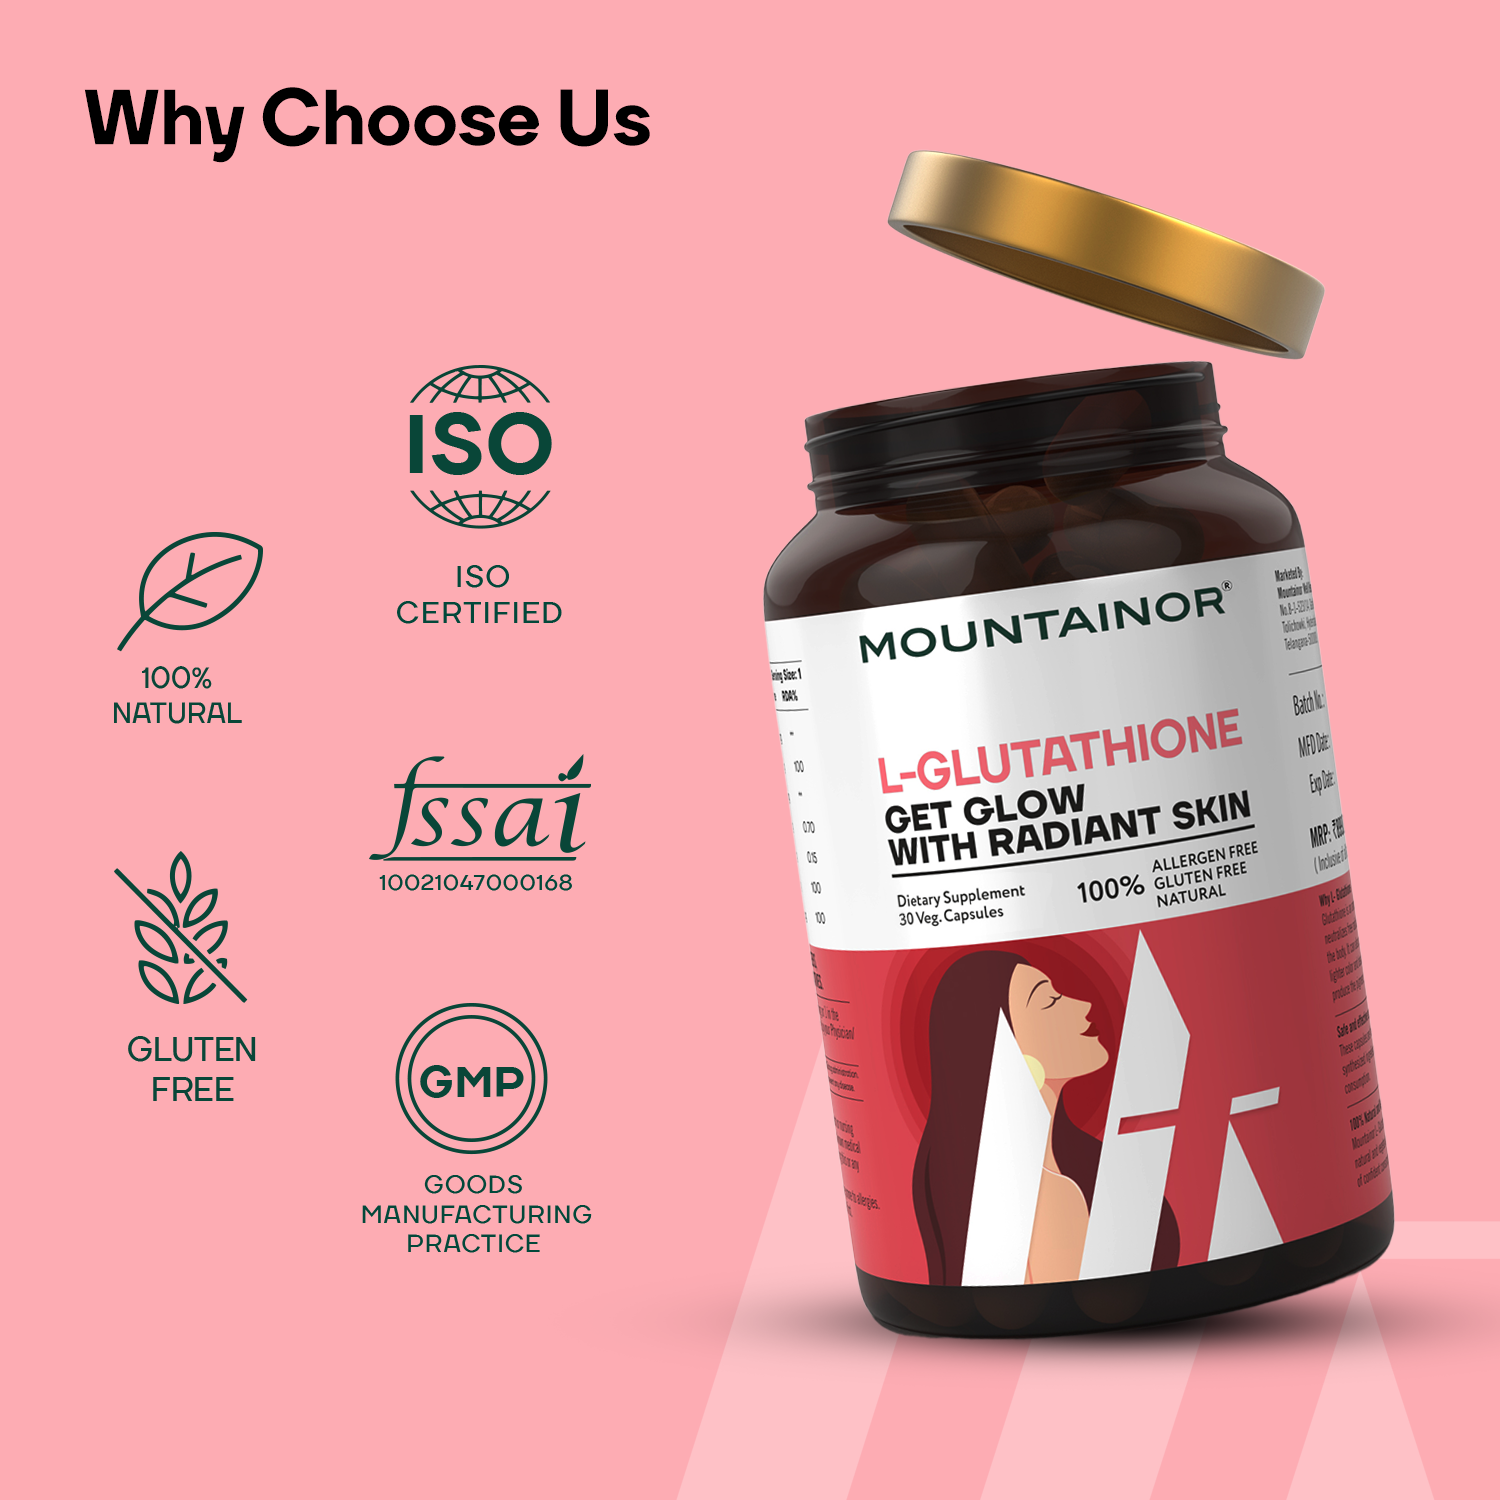 L-Glutathione REDUCED™ 1000mg Caps , For Korean Glowing, Radiance Skin with Vitamins C